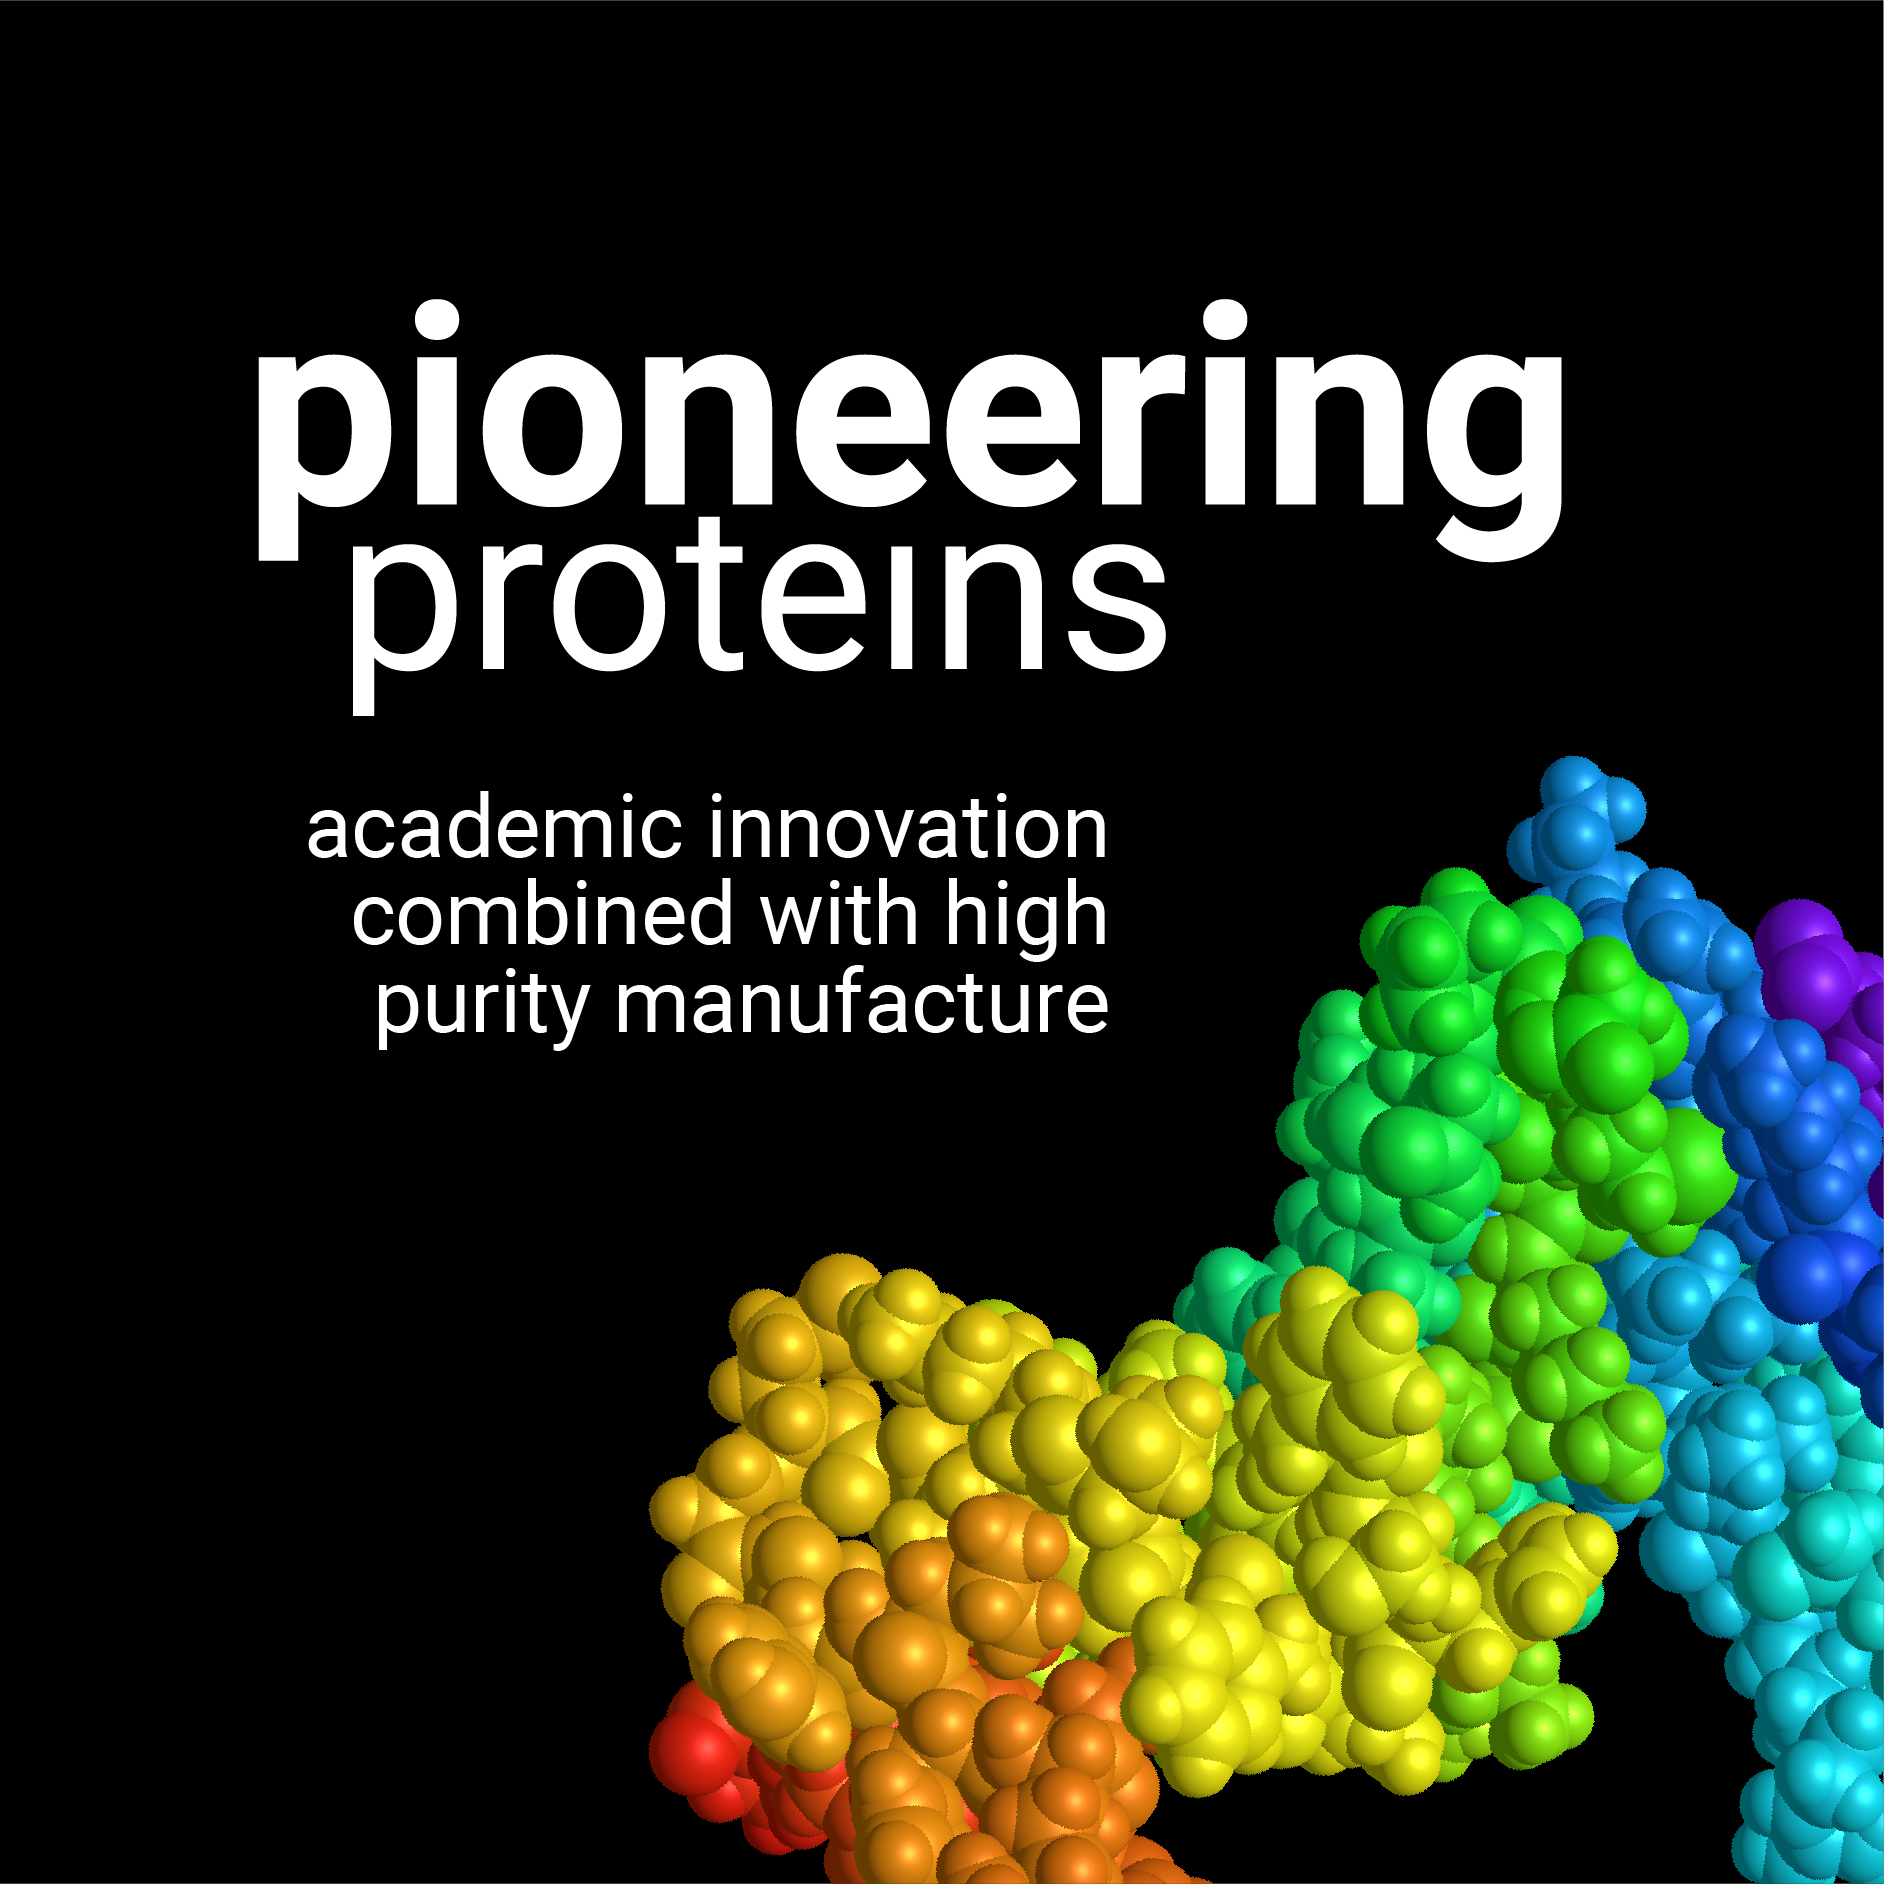 Pioneering proteins intro